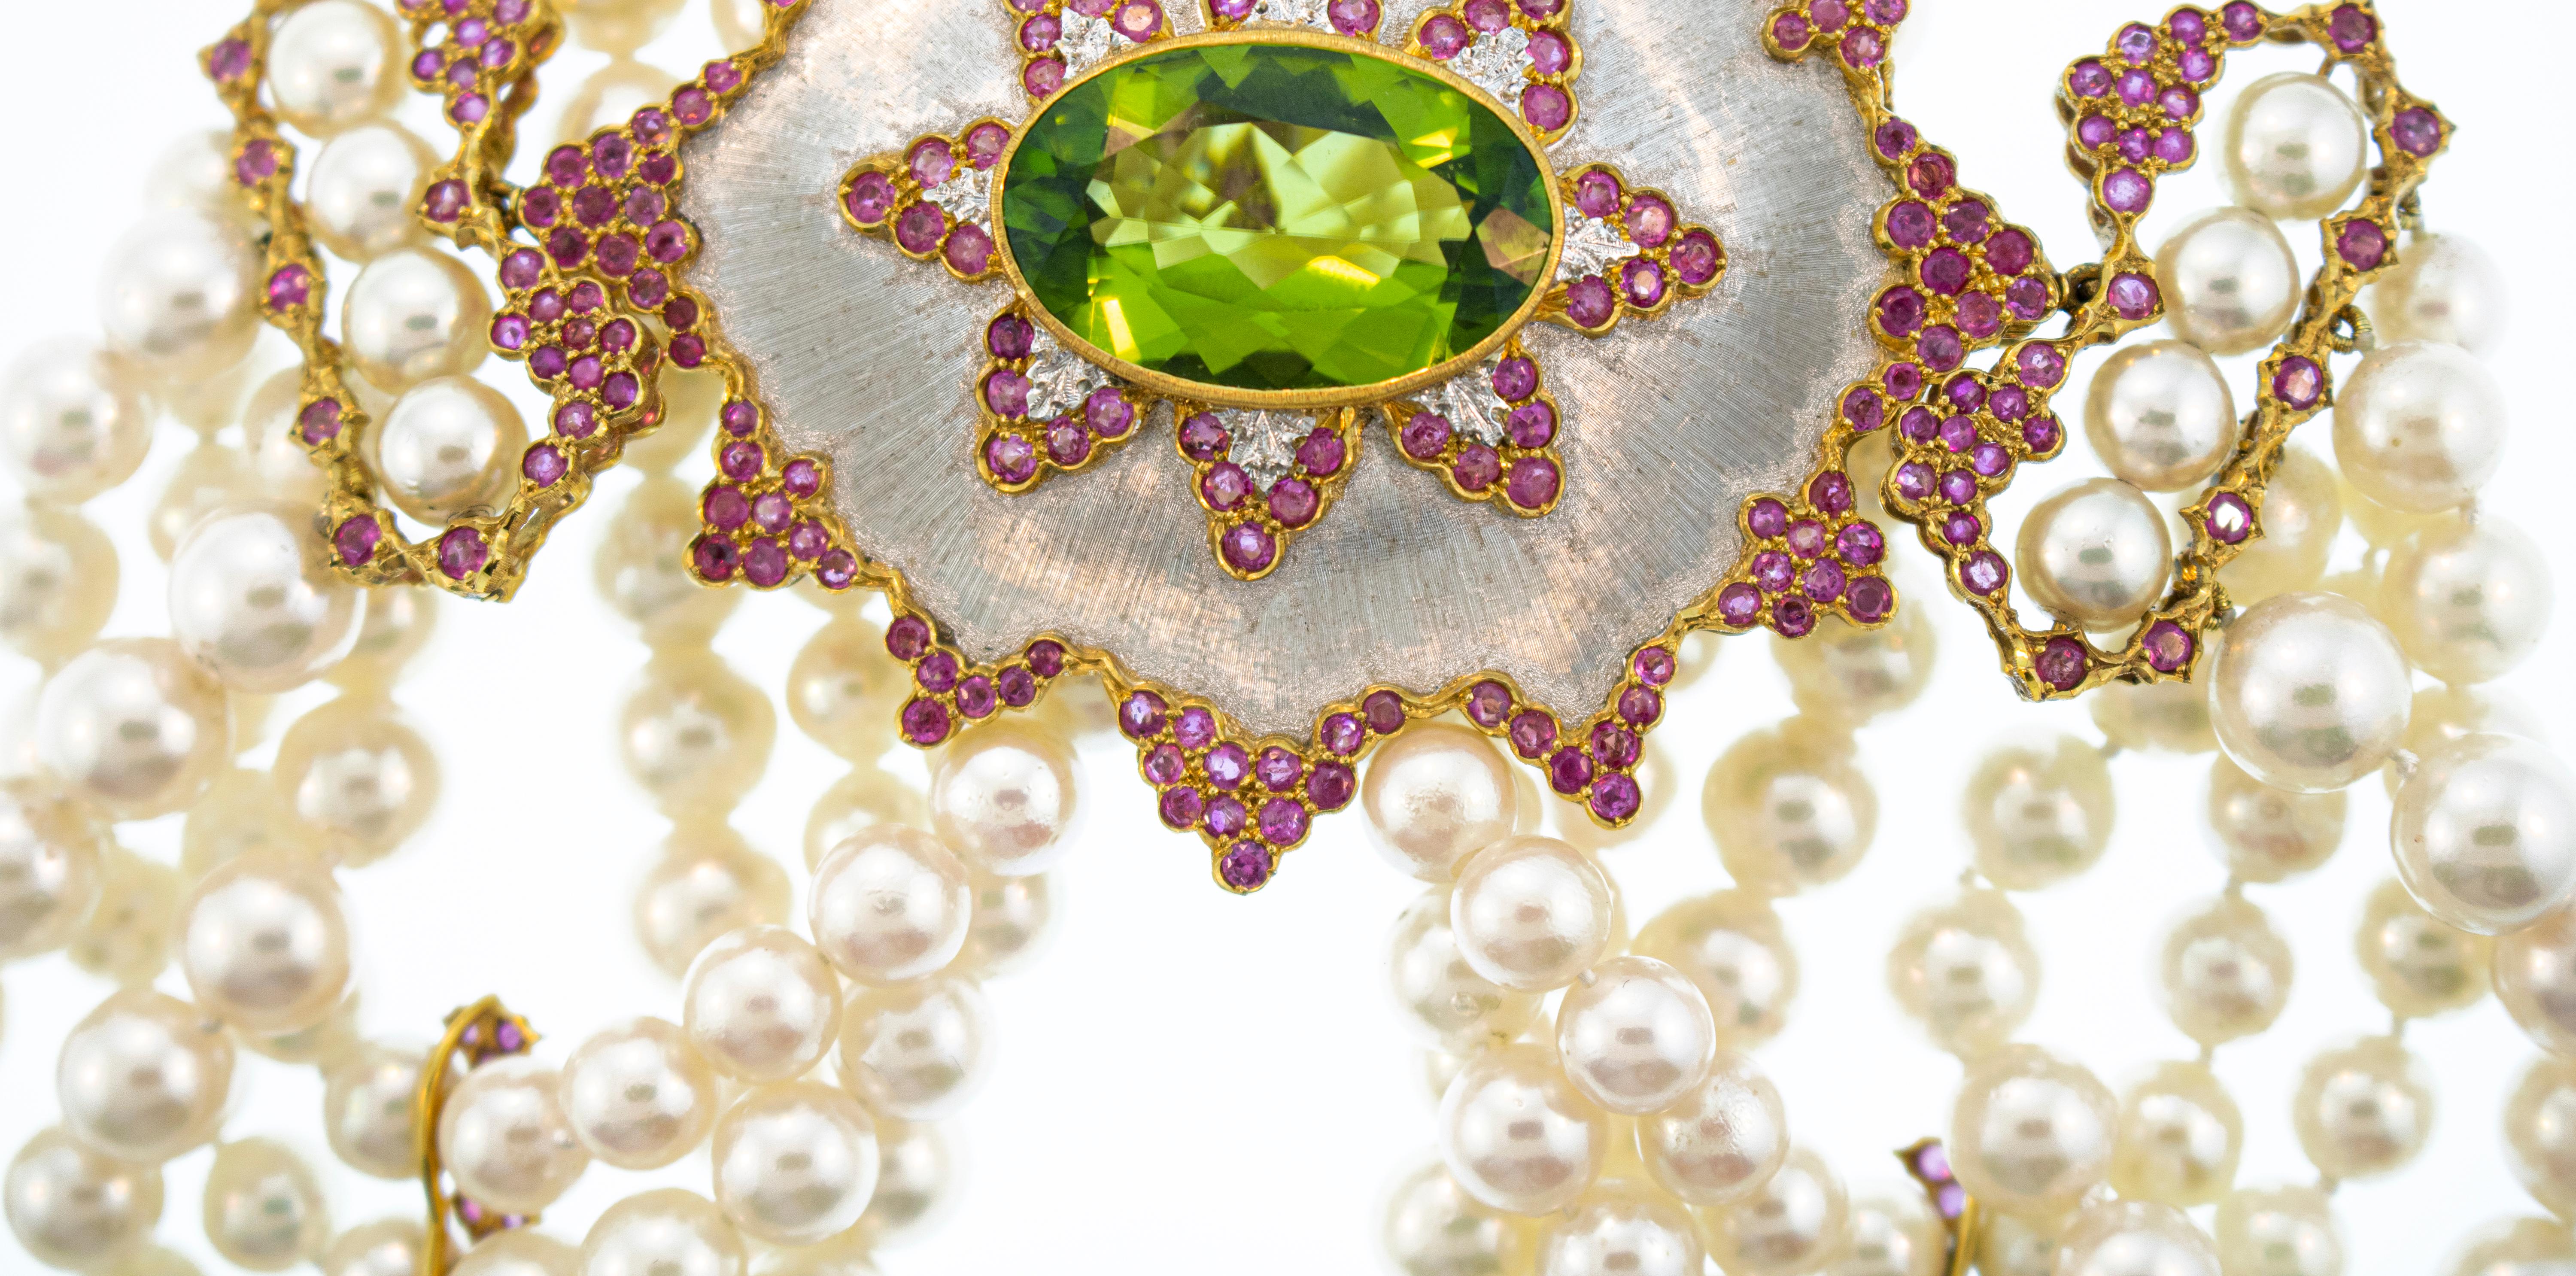 Women's or Men's Buccellati Pearl Pink Sapphire Peridot Necklace with Detachable Brooch